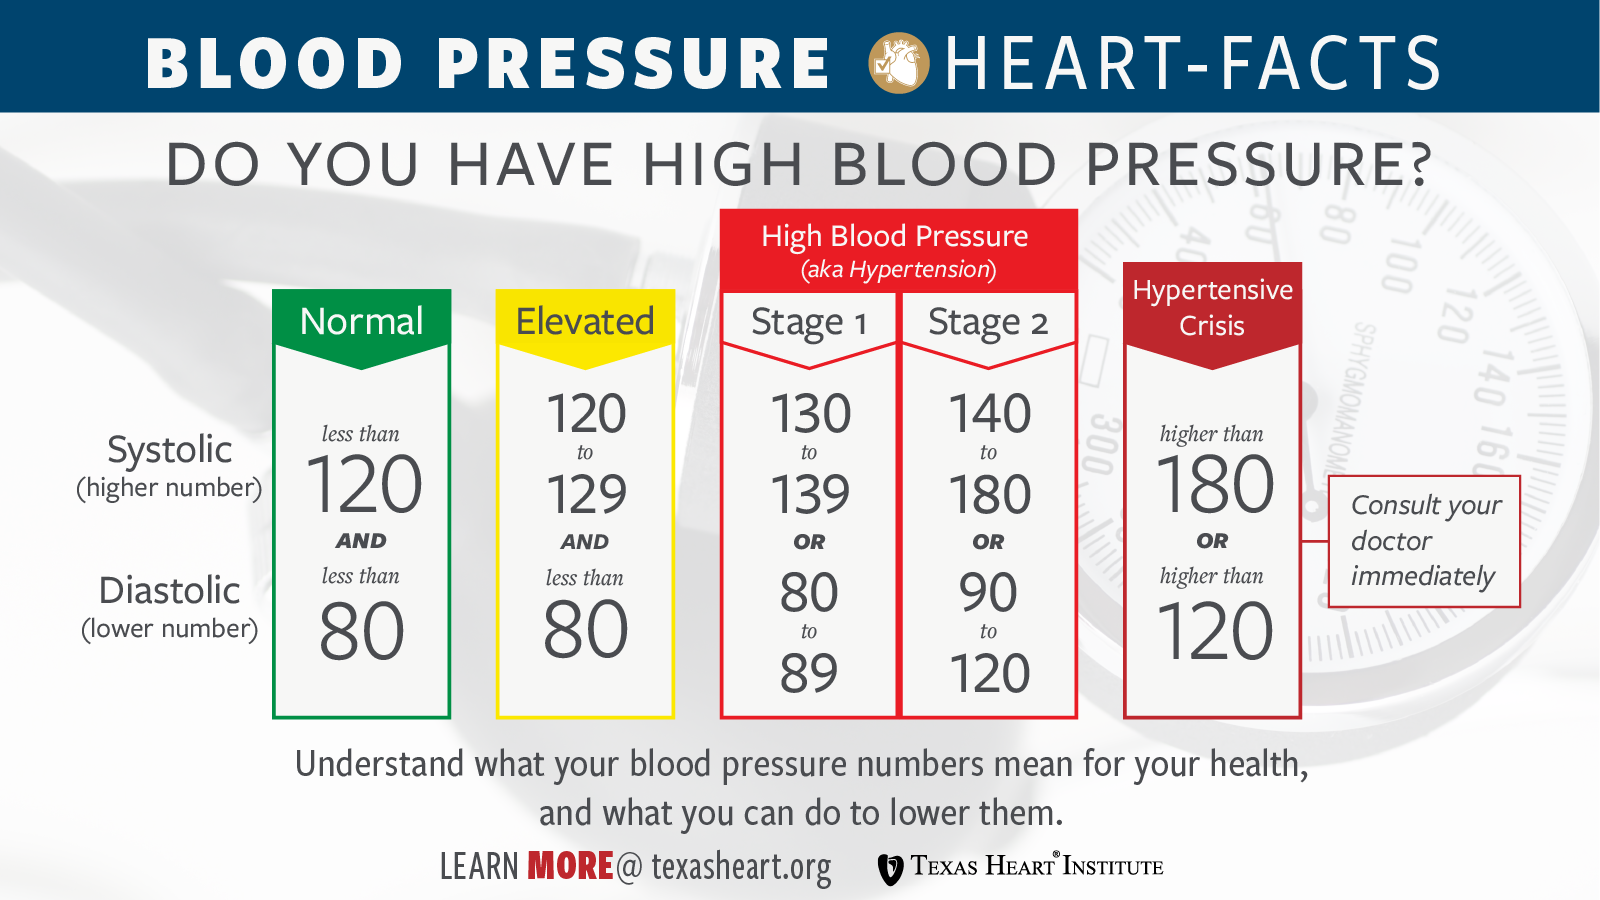 What does it mean when your blood pressure is high?